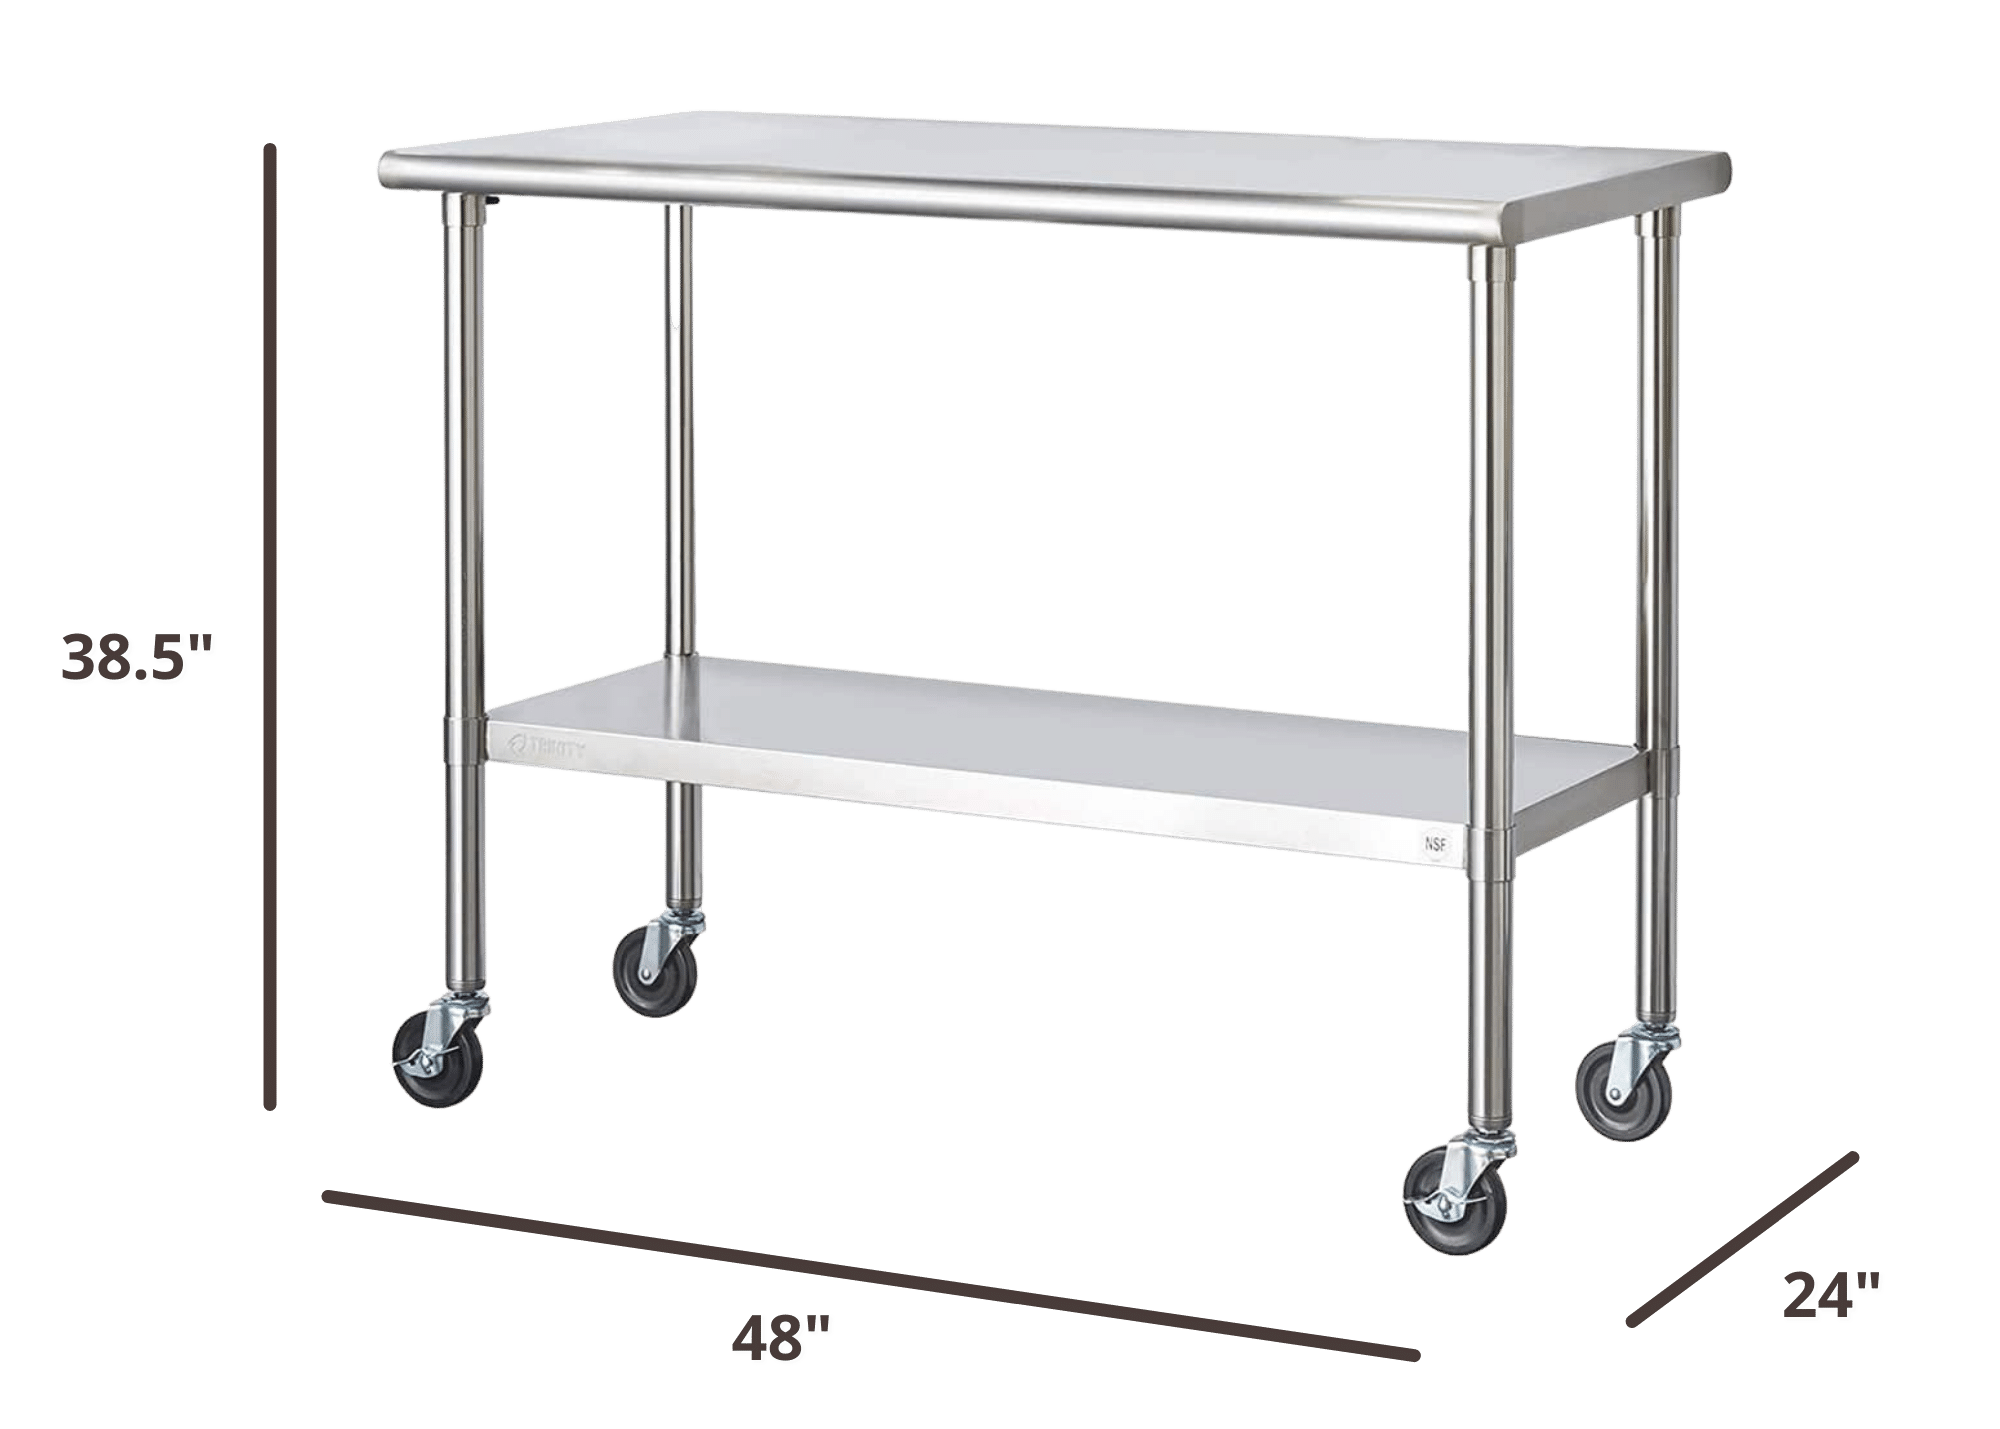 48 inches wide by 24 inches deep stainless steel prep table with wheels